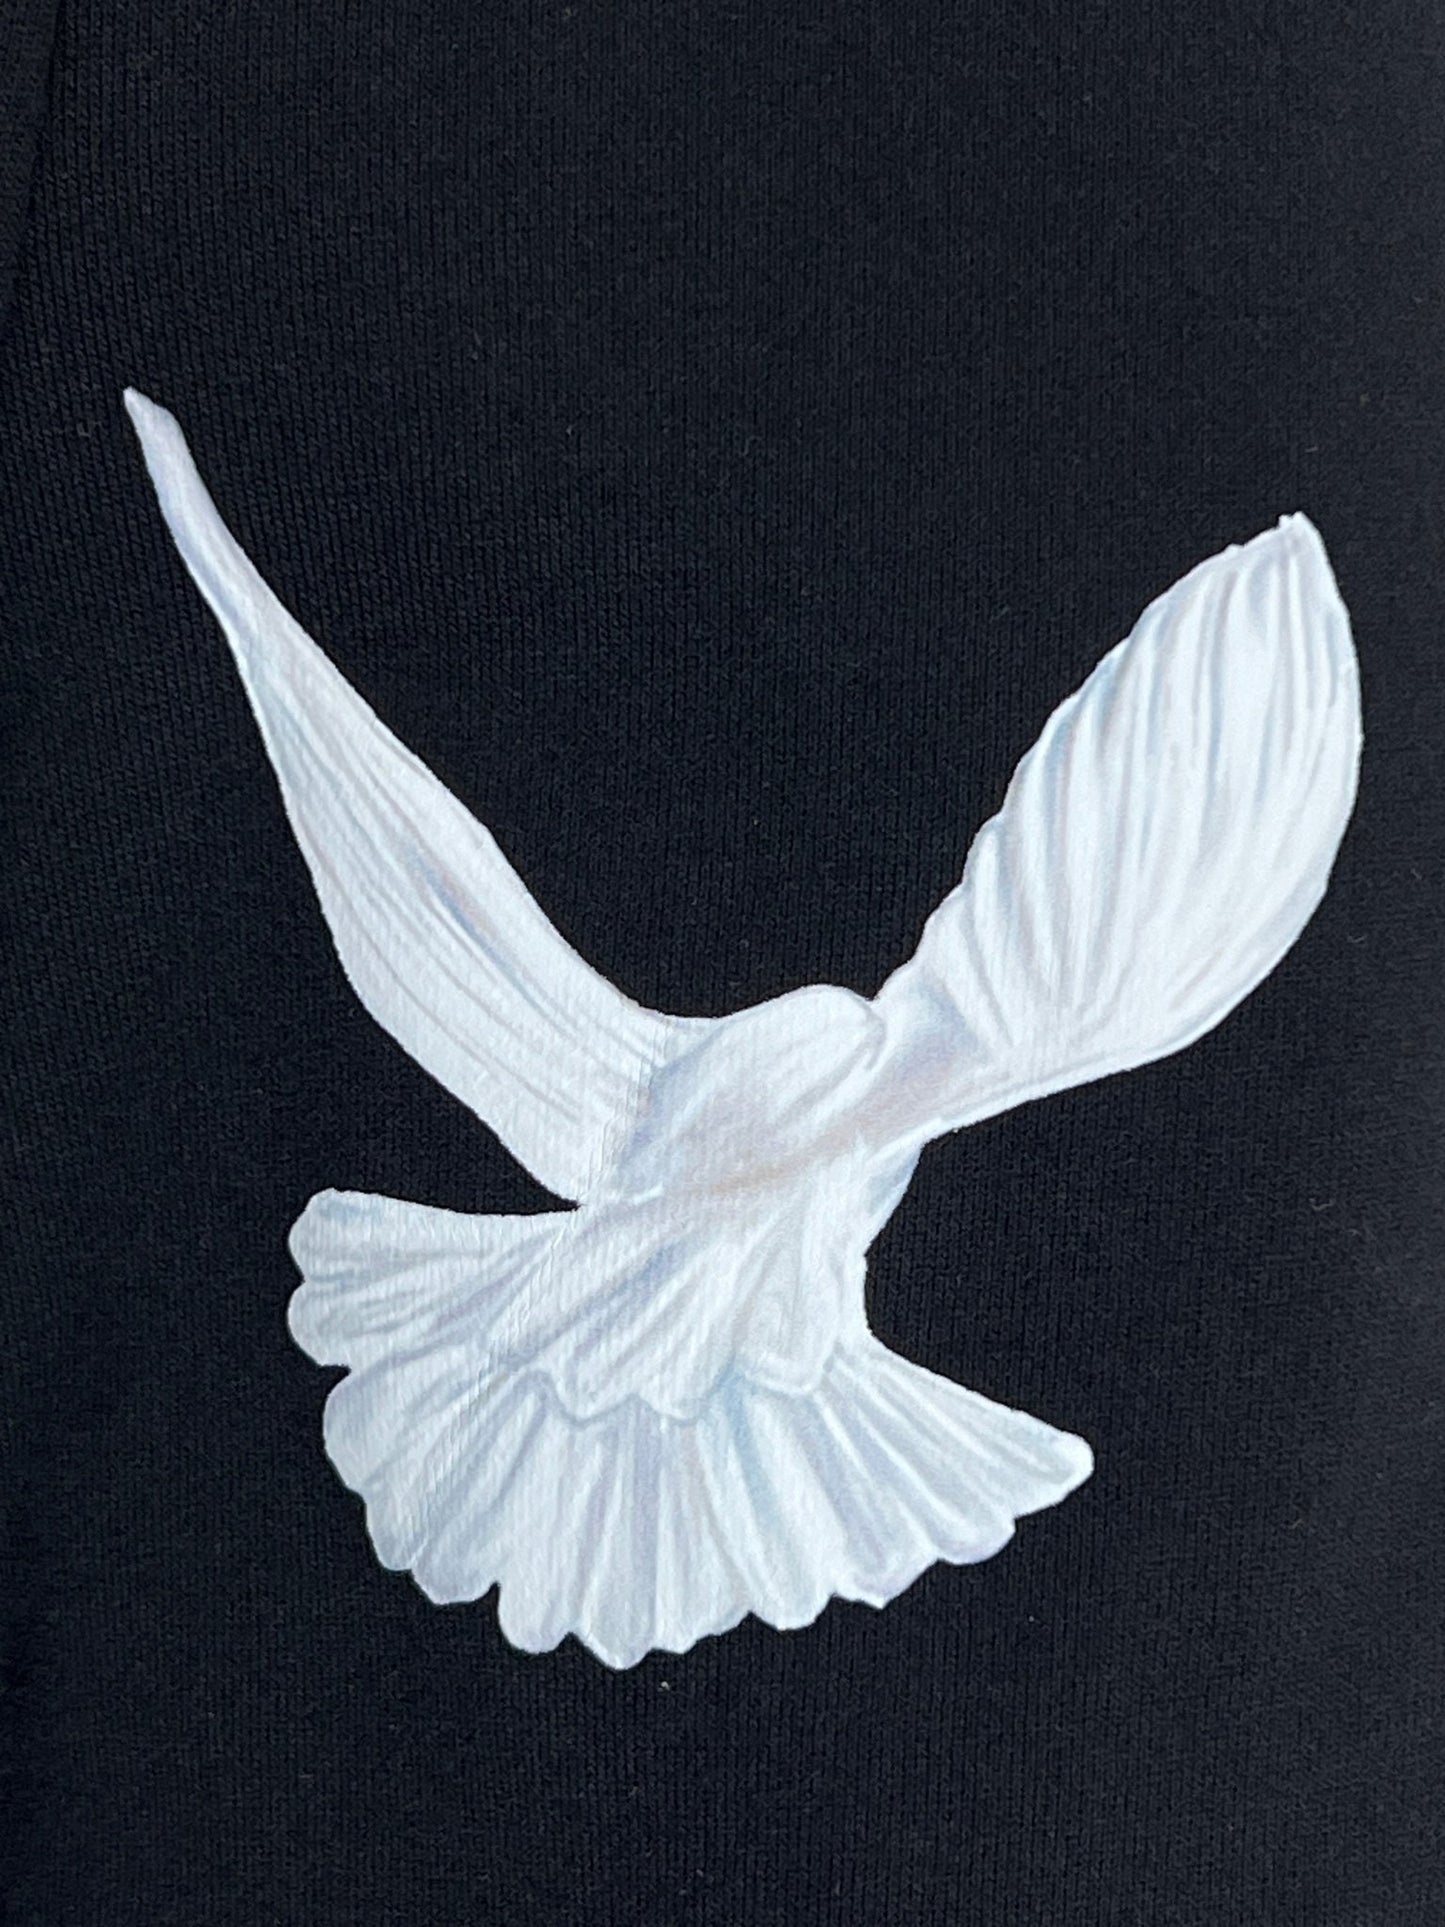 A 3.PARADIS black t-shirt with a white dove embroidered on it.